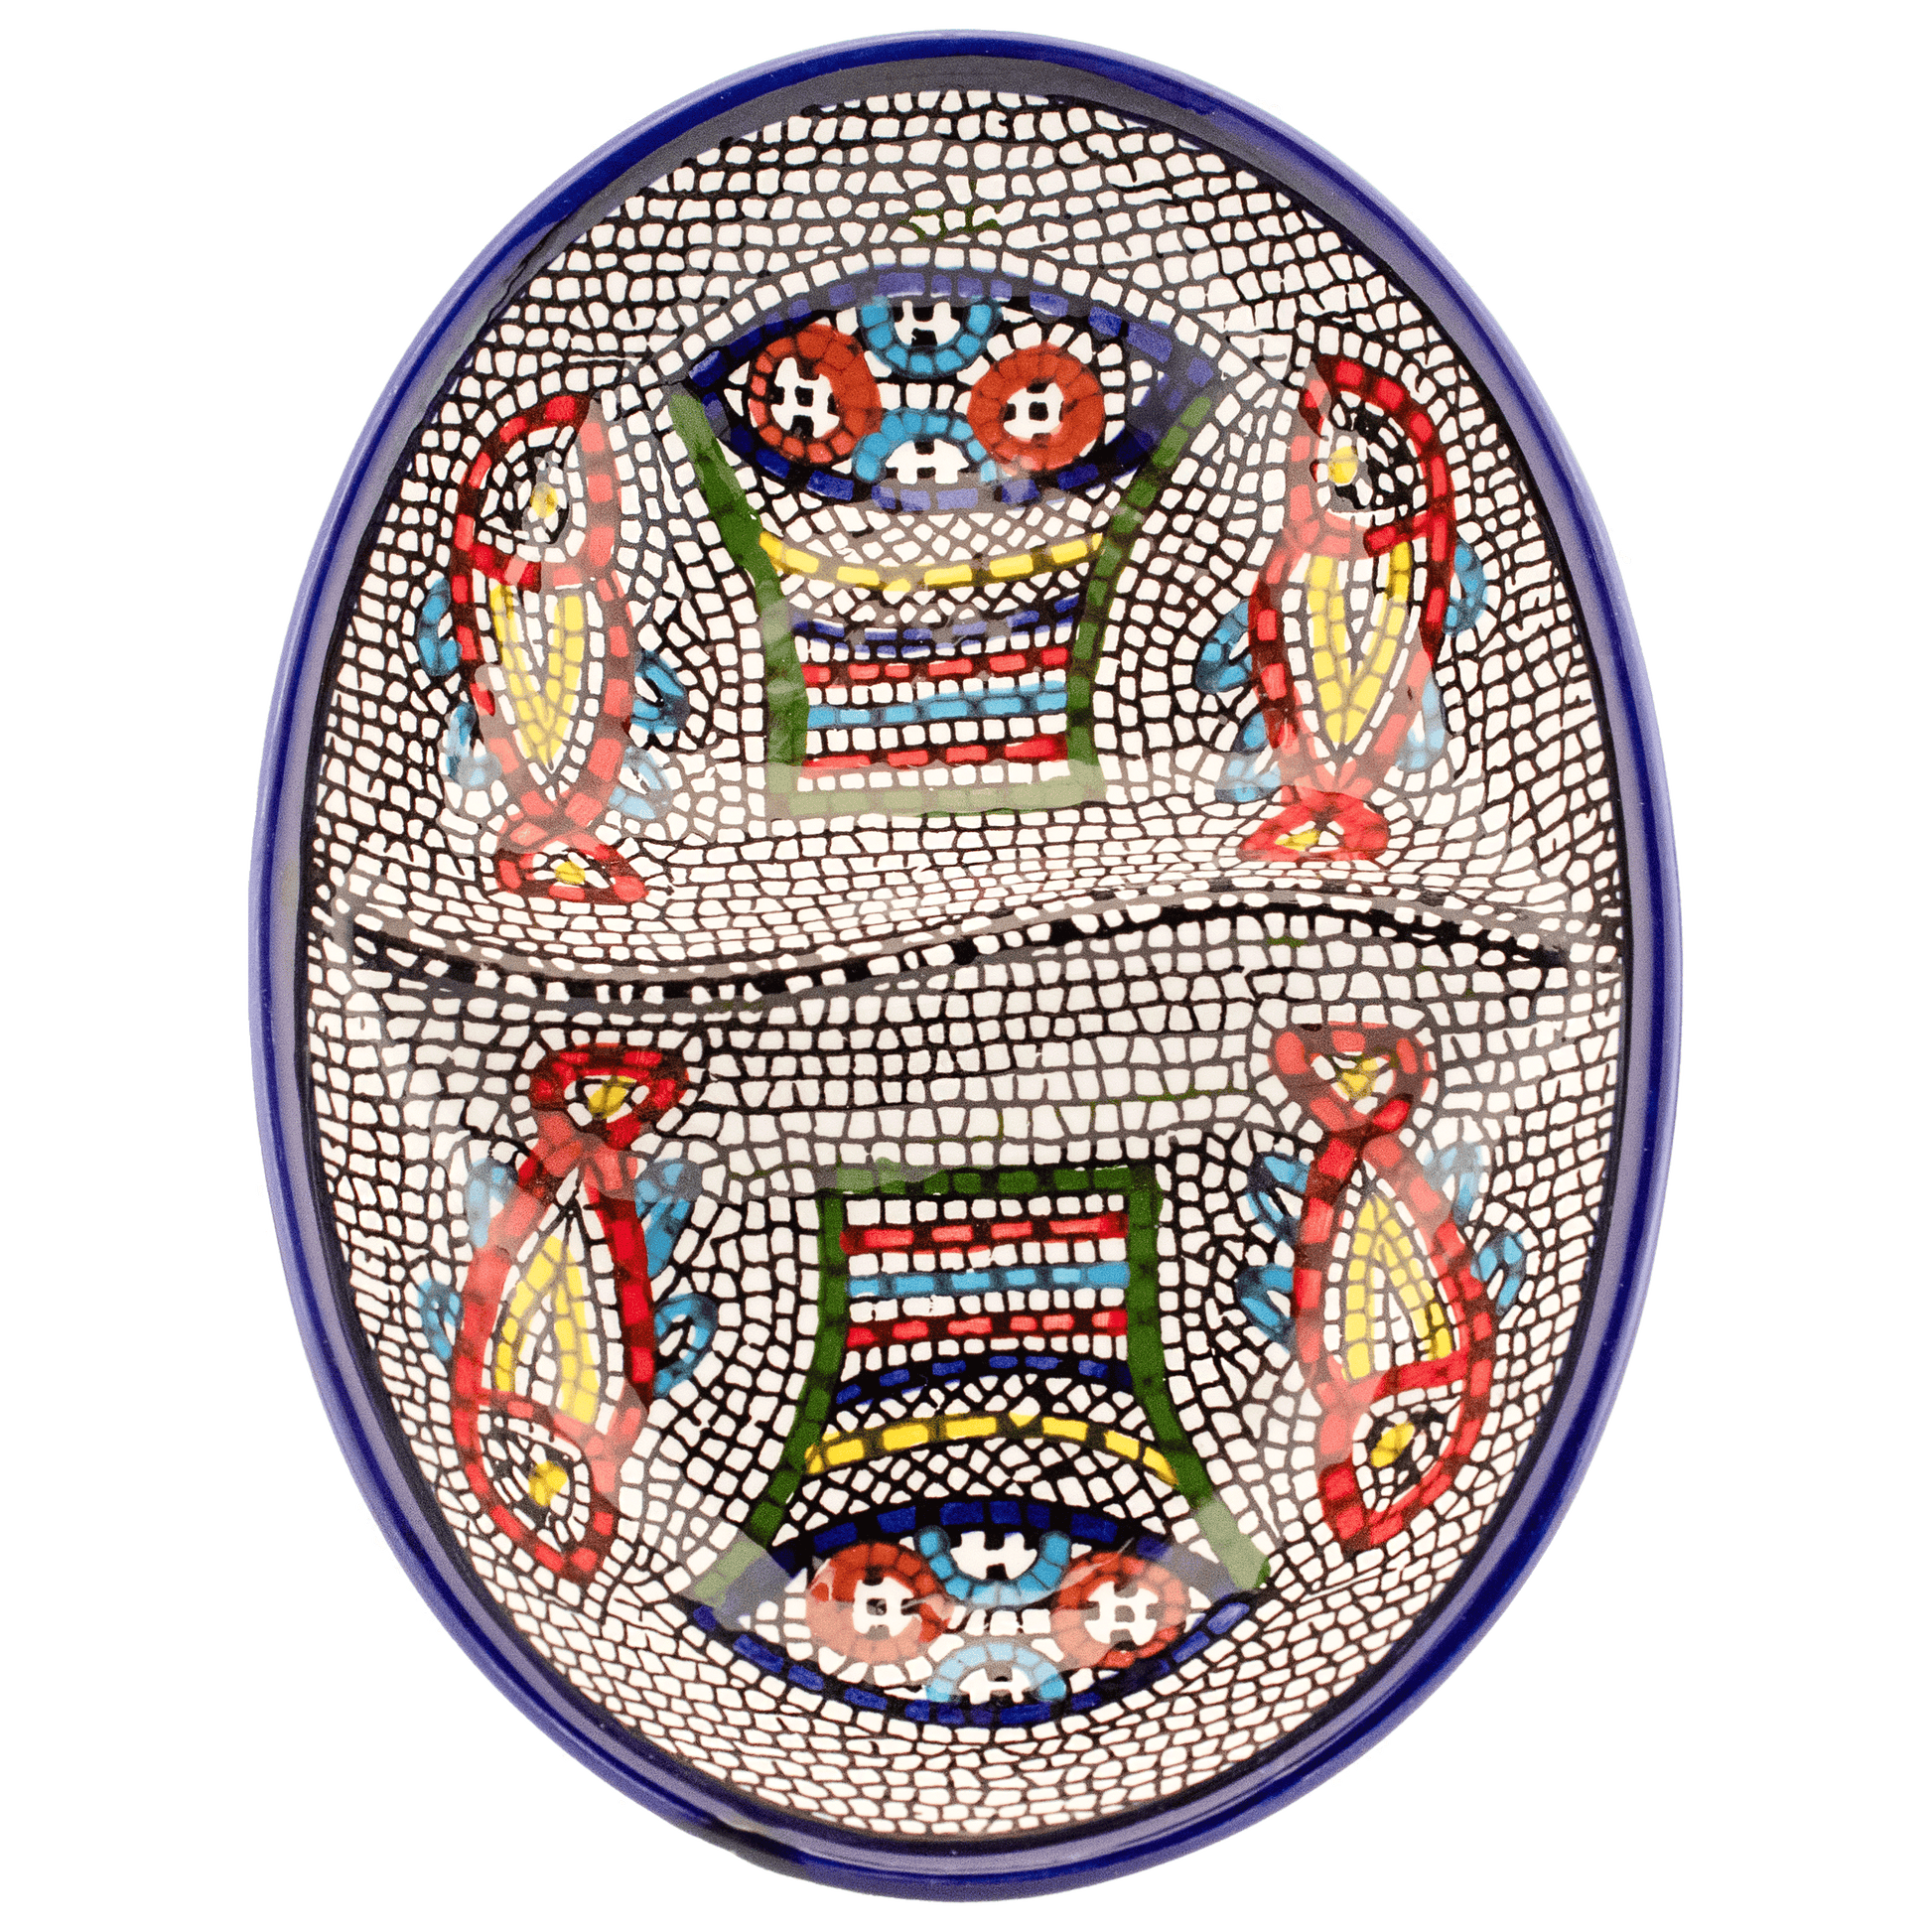 Divided Armenian ceramic dish with loaves and fish design